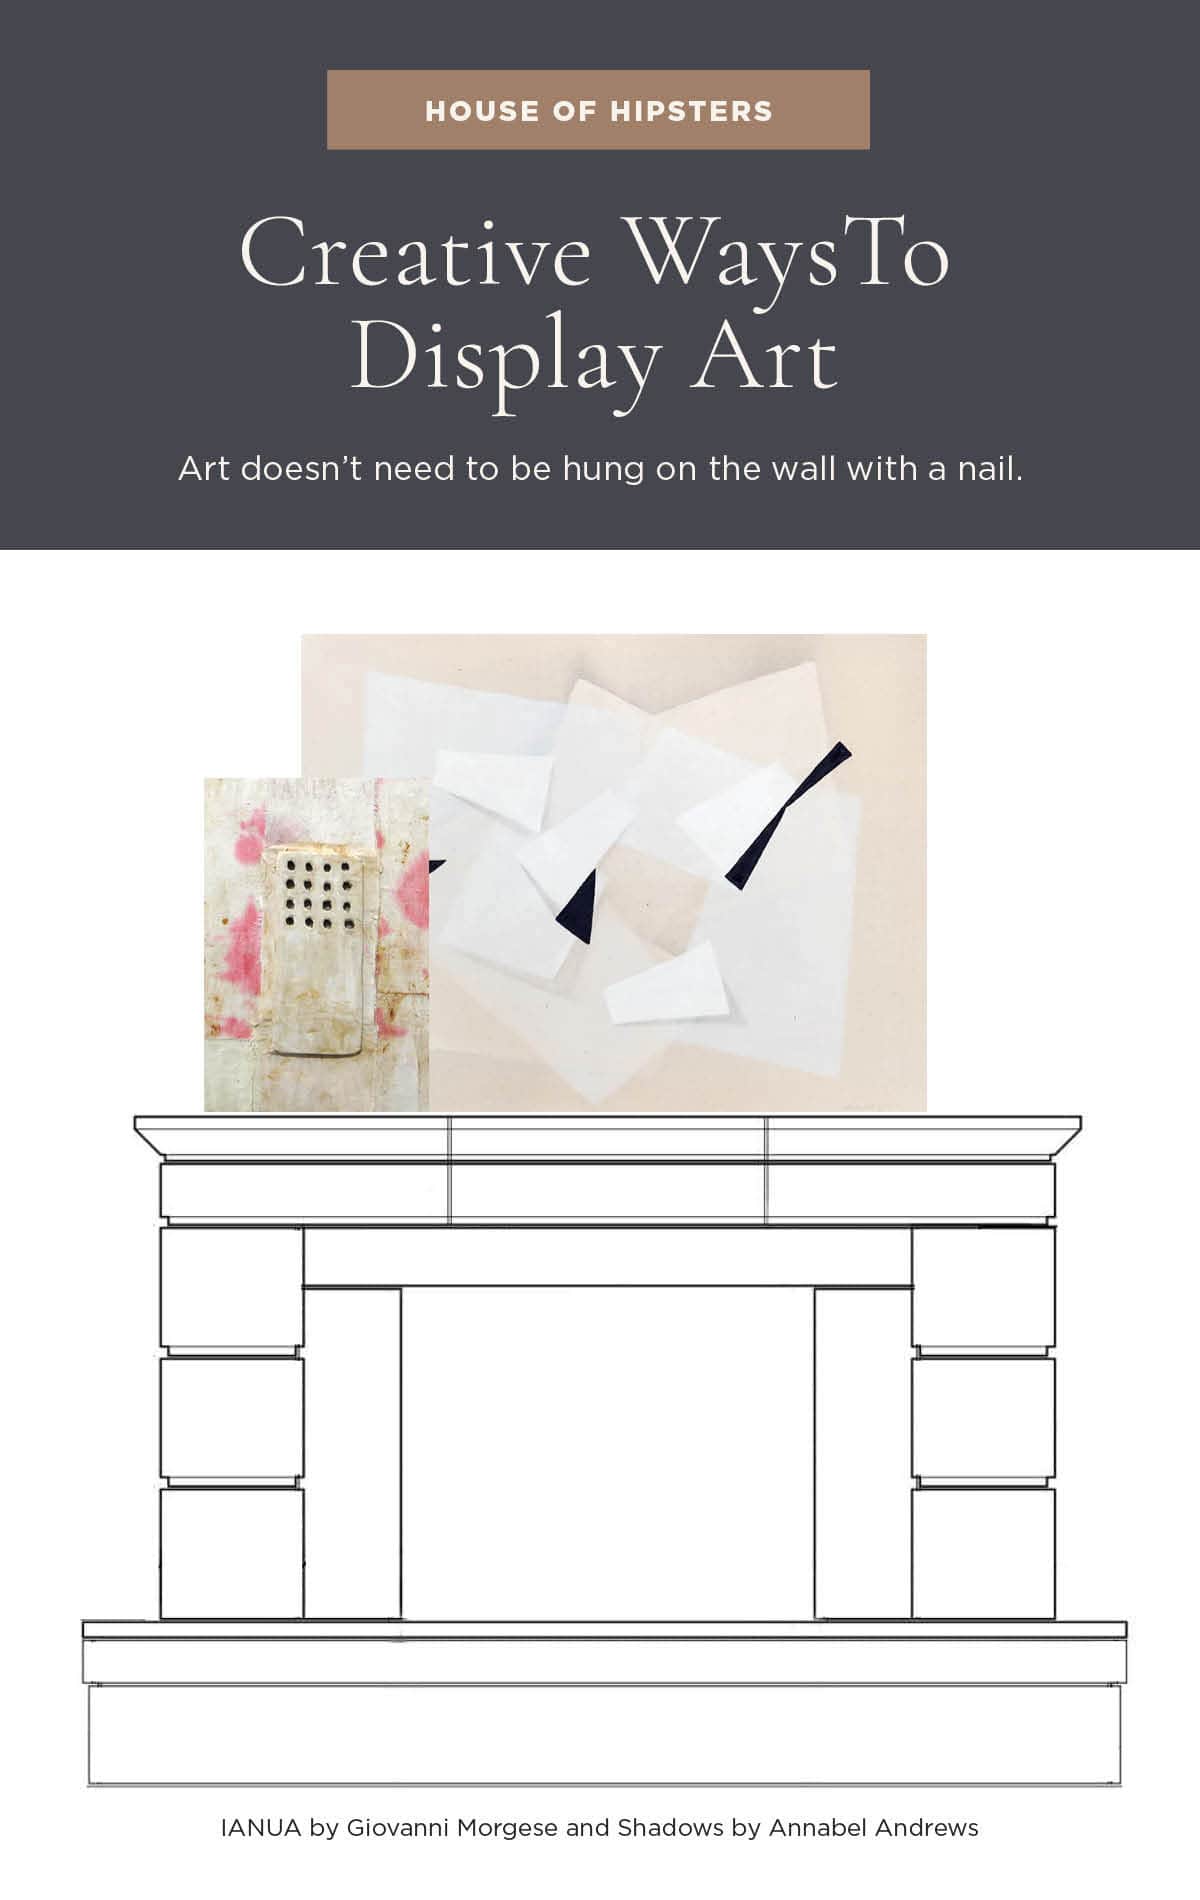 Tips For Decorating With Art - Here are some creative ways to display your art.